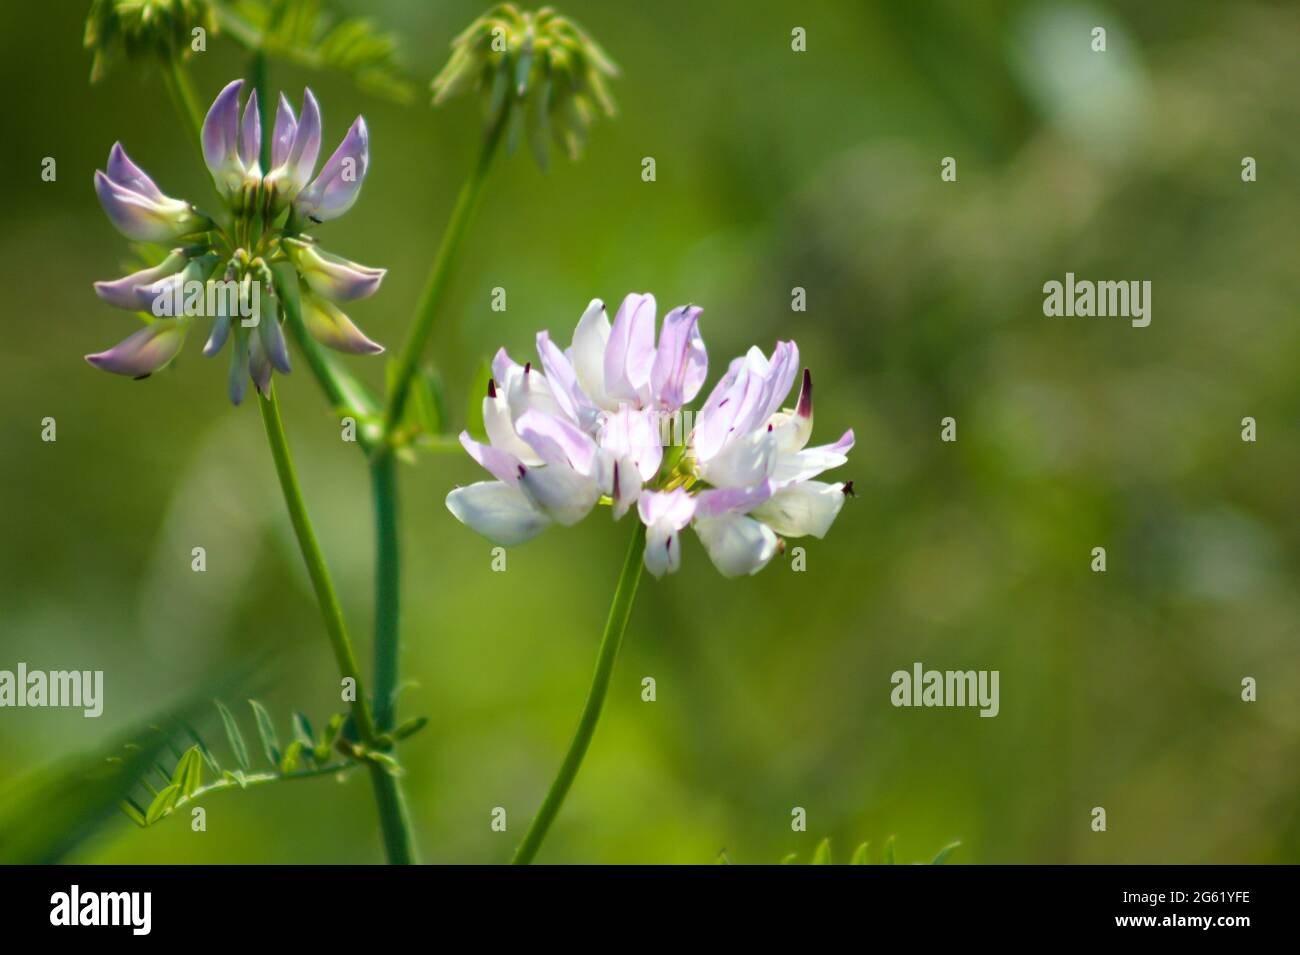 Common crownvetch in bloom close-up view with green background Stock Photo